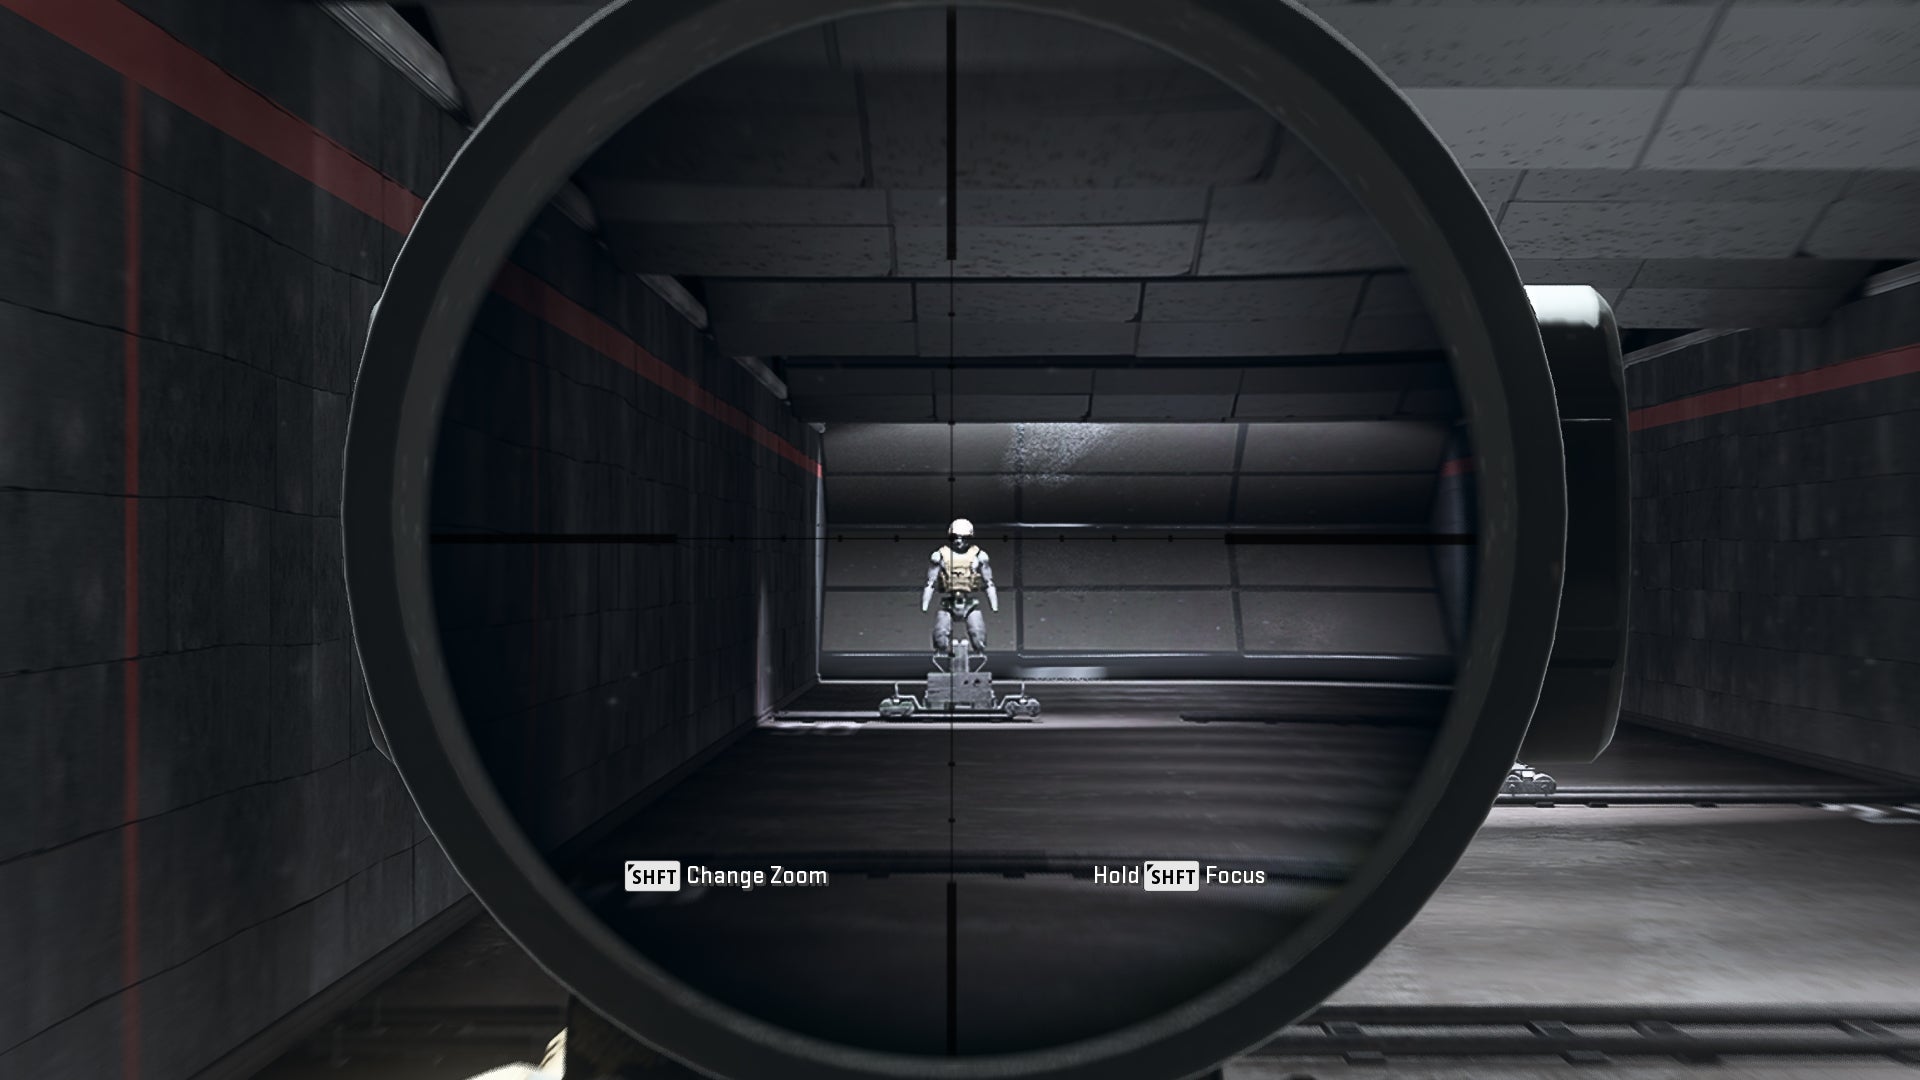 The player in Warzone 2.0 aims at a training dummy using the SP-X 80 6.6x optic attachment.